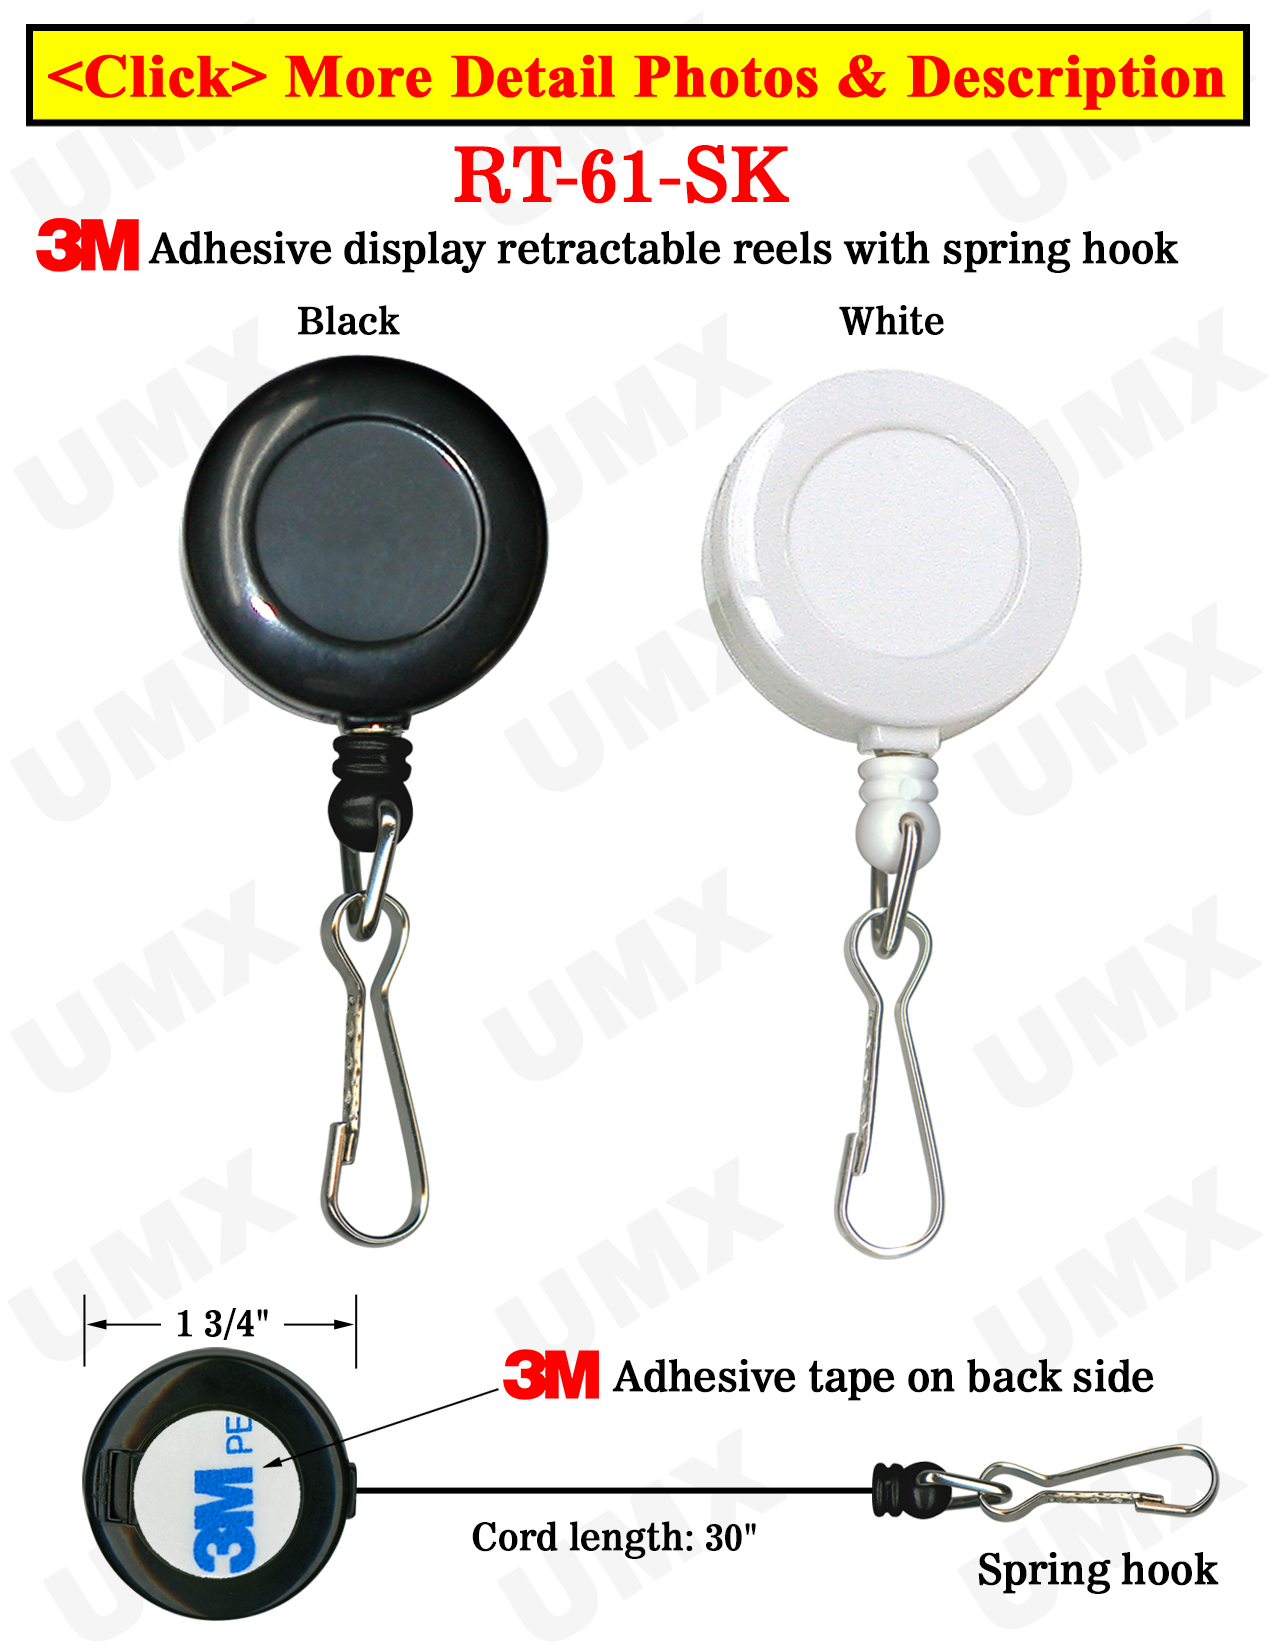 http://www.usalanyards.com/a/making/hardware/buckle/safety/RT-61-3M/adhesive-display-retractable-reels-rt-61-sk-5.jpg